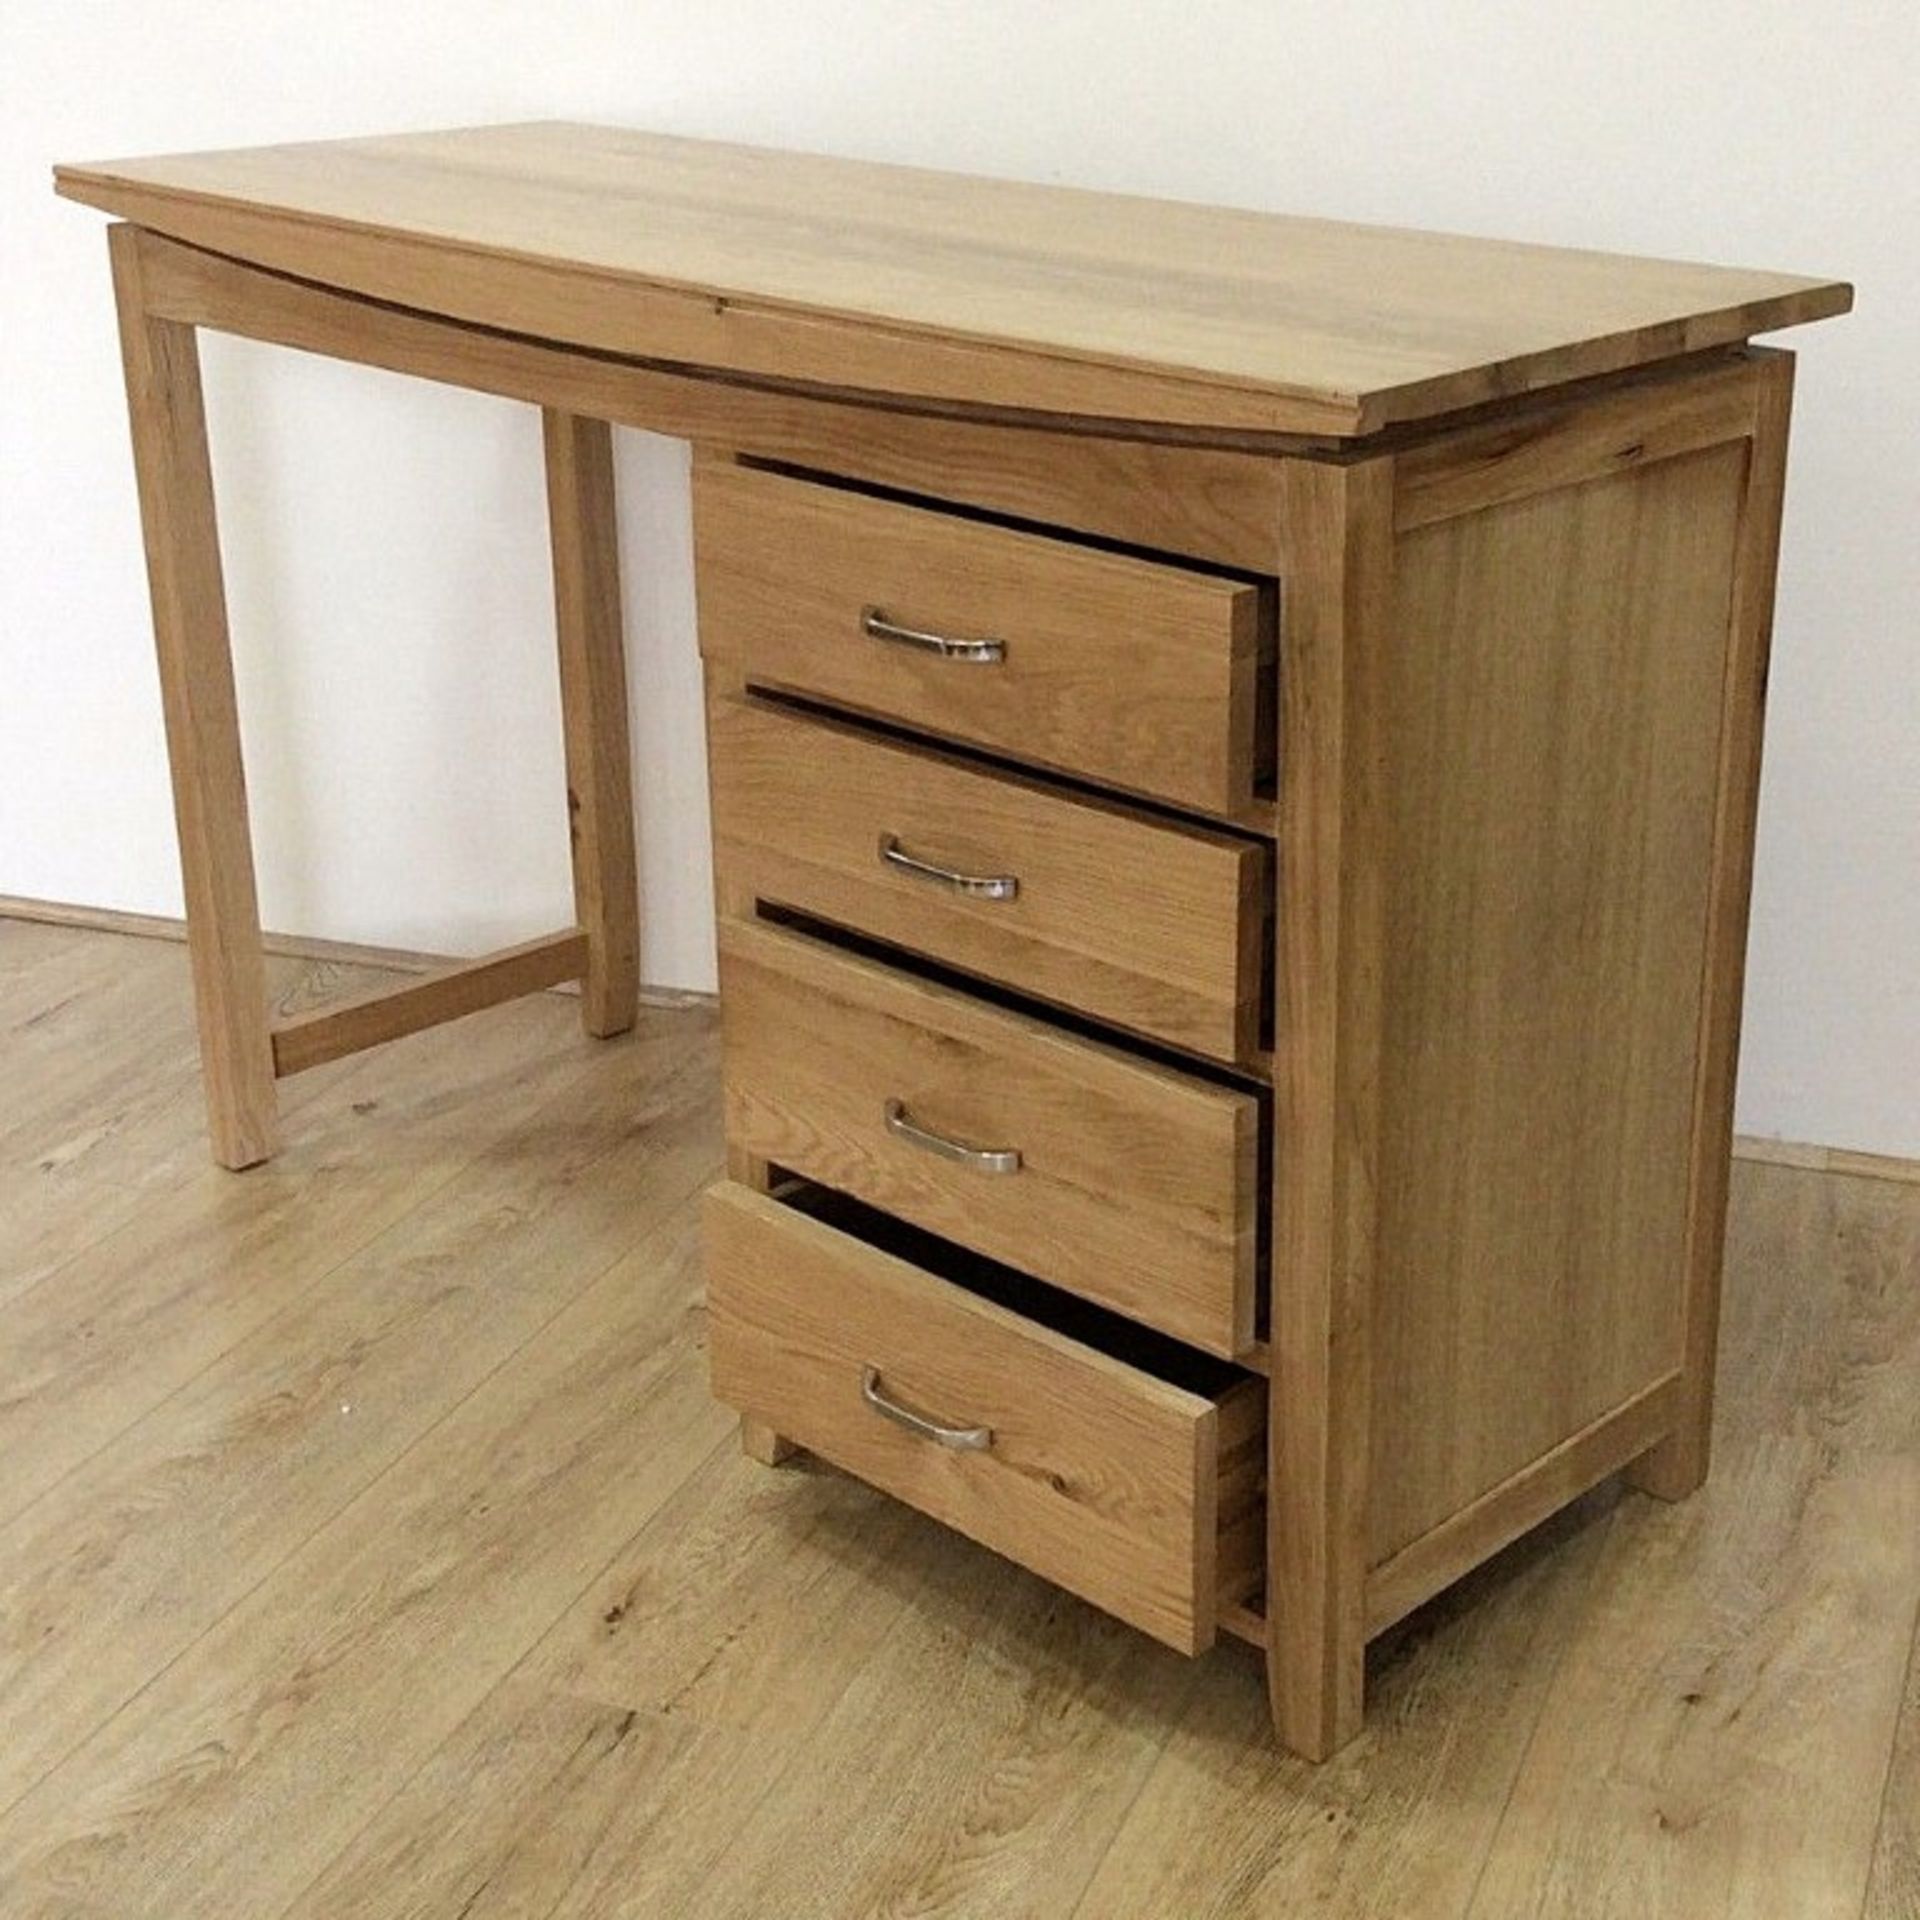 1 x Matlock Solid Oak Dressing Table With 4 Drawers - MADE FROM 100% AMERICAN SOLID OAK - CL112 - - Image 2 of 2